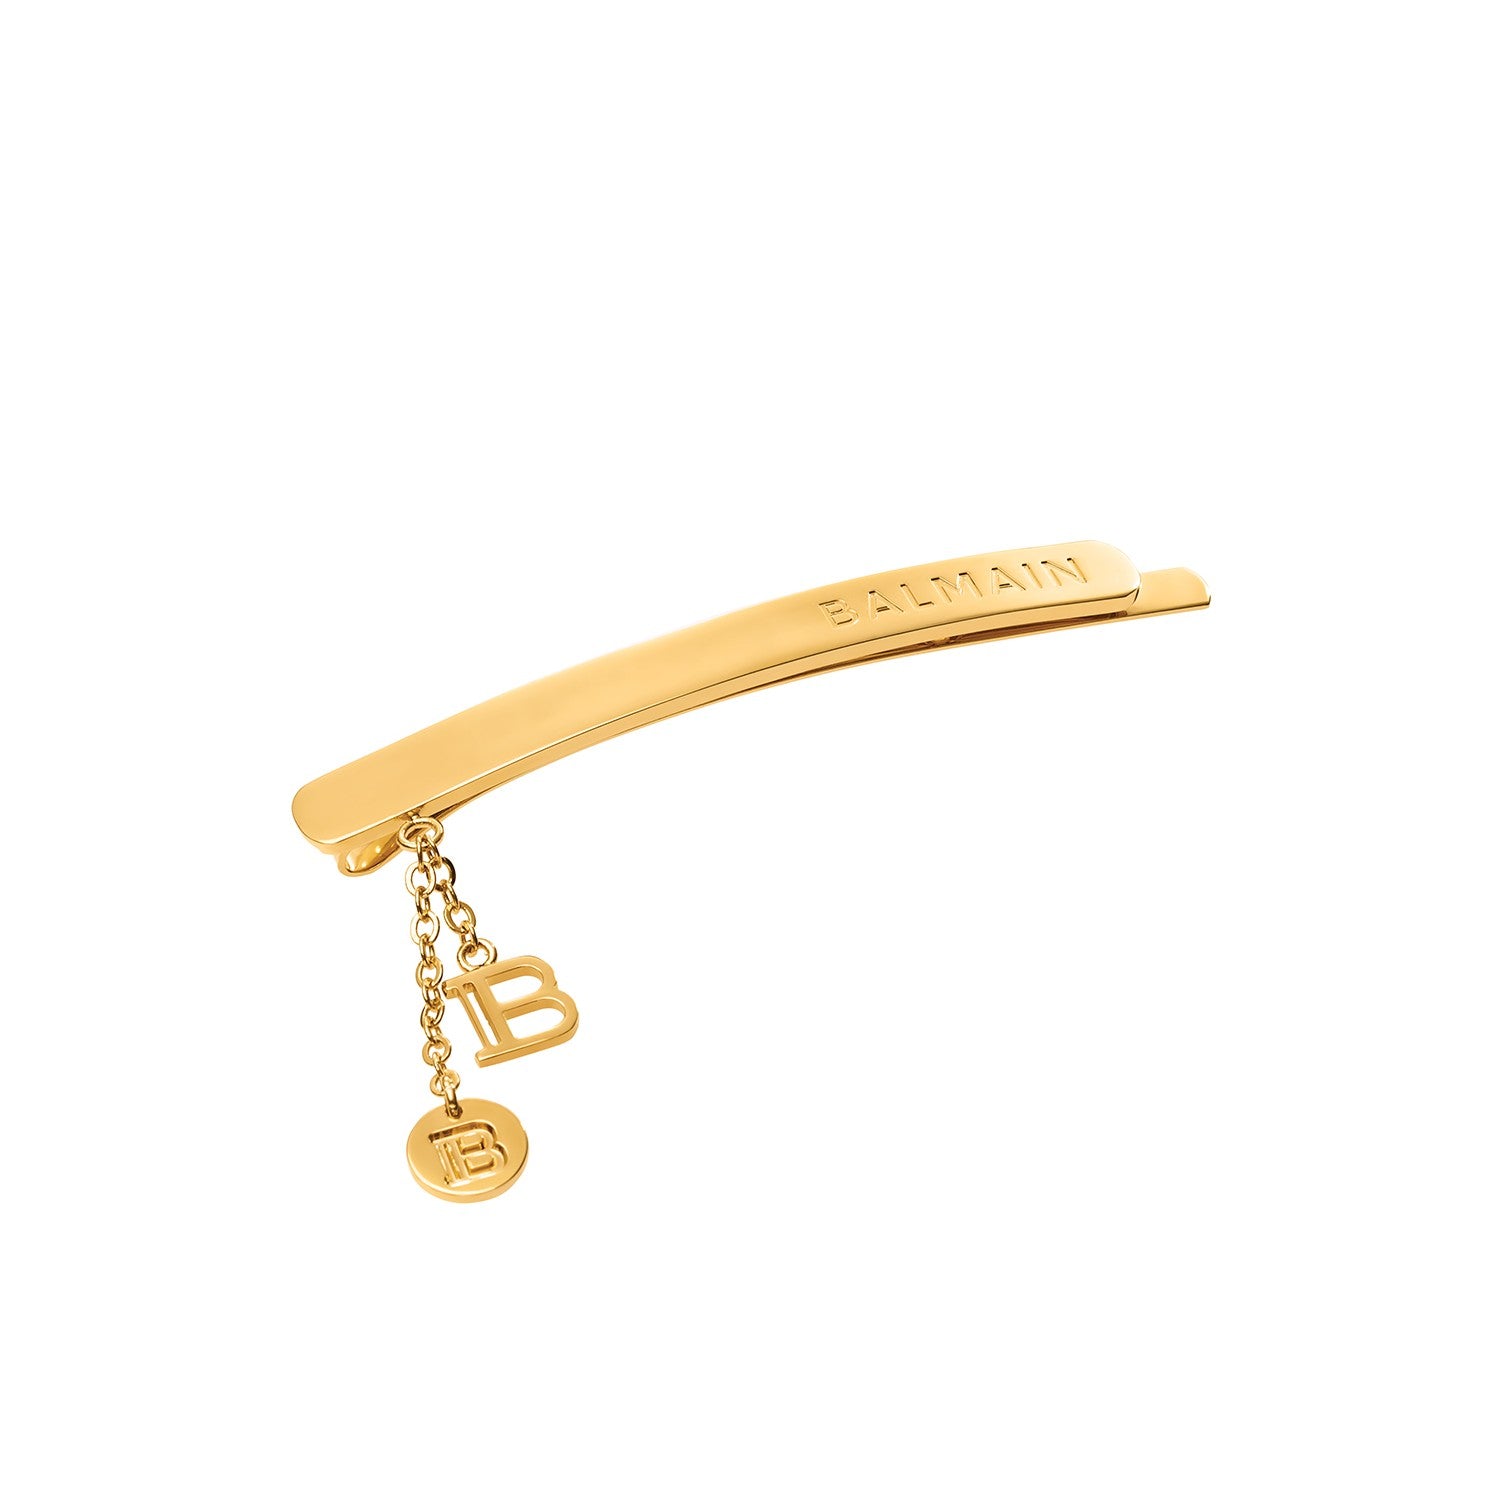 Limited Edition Hair Slide Gold Jewelry - Spring/Summer